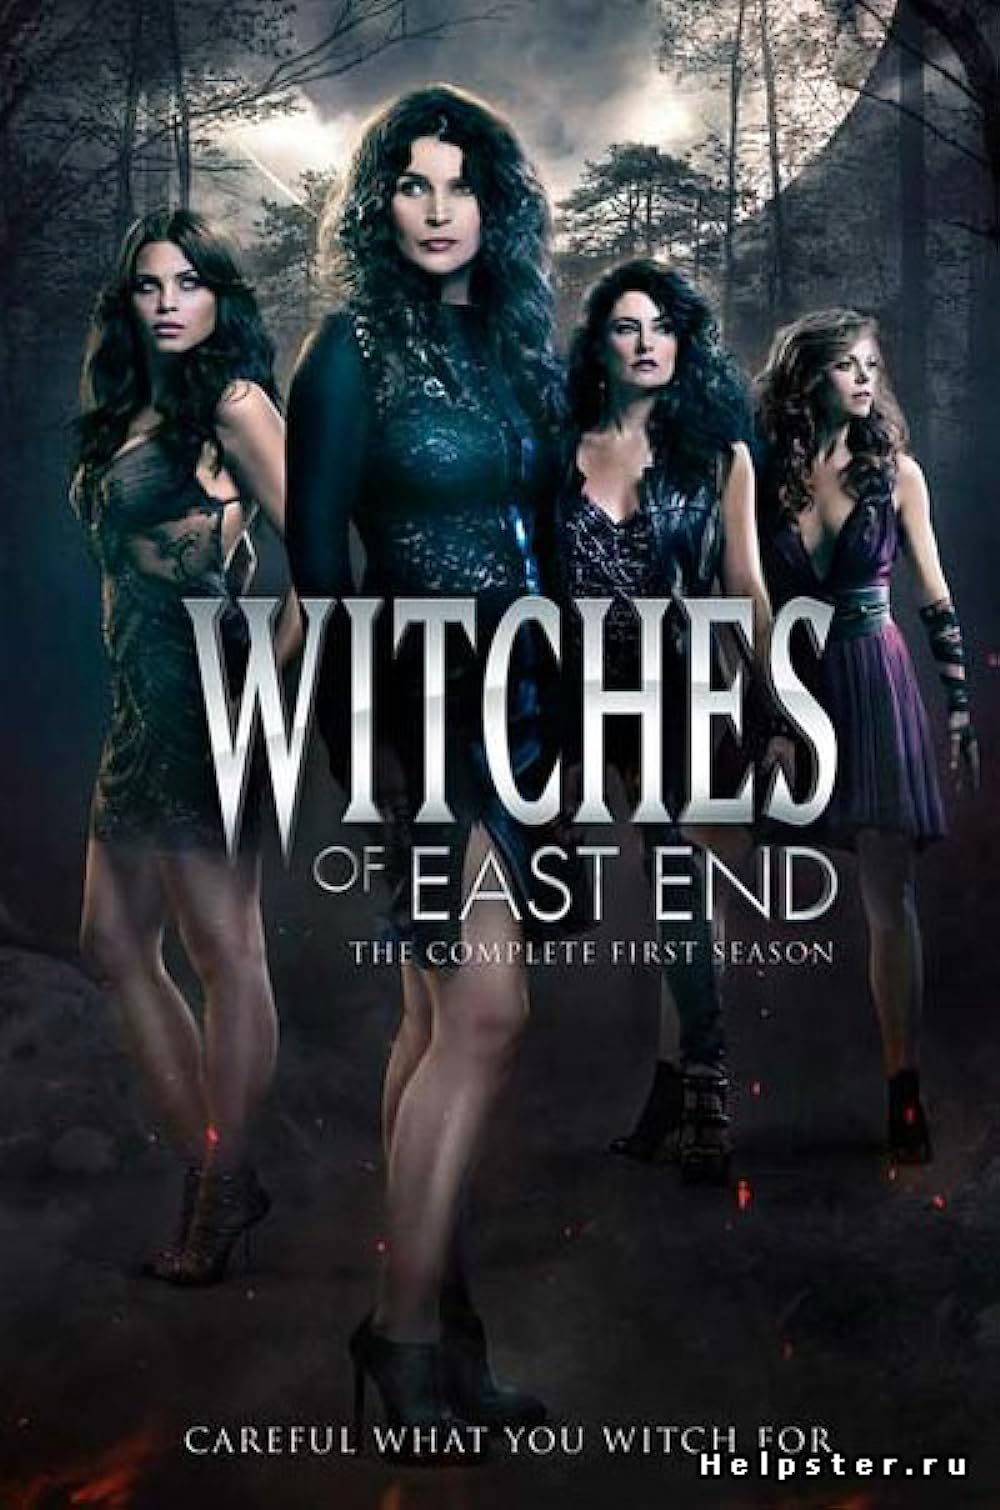 Witches of East End poster